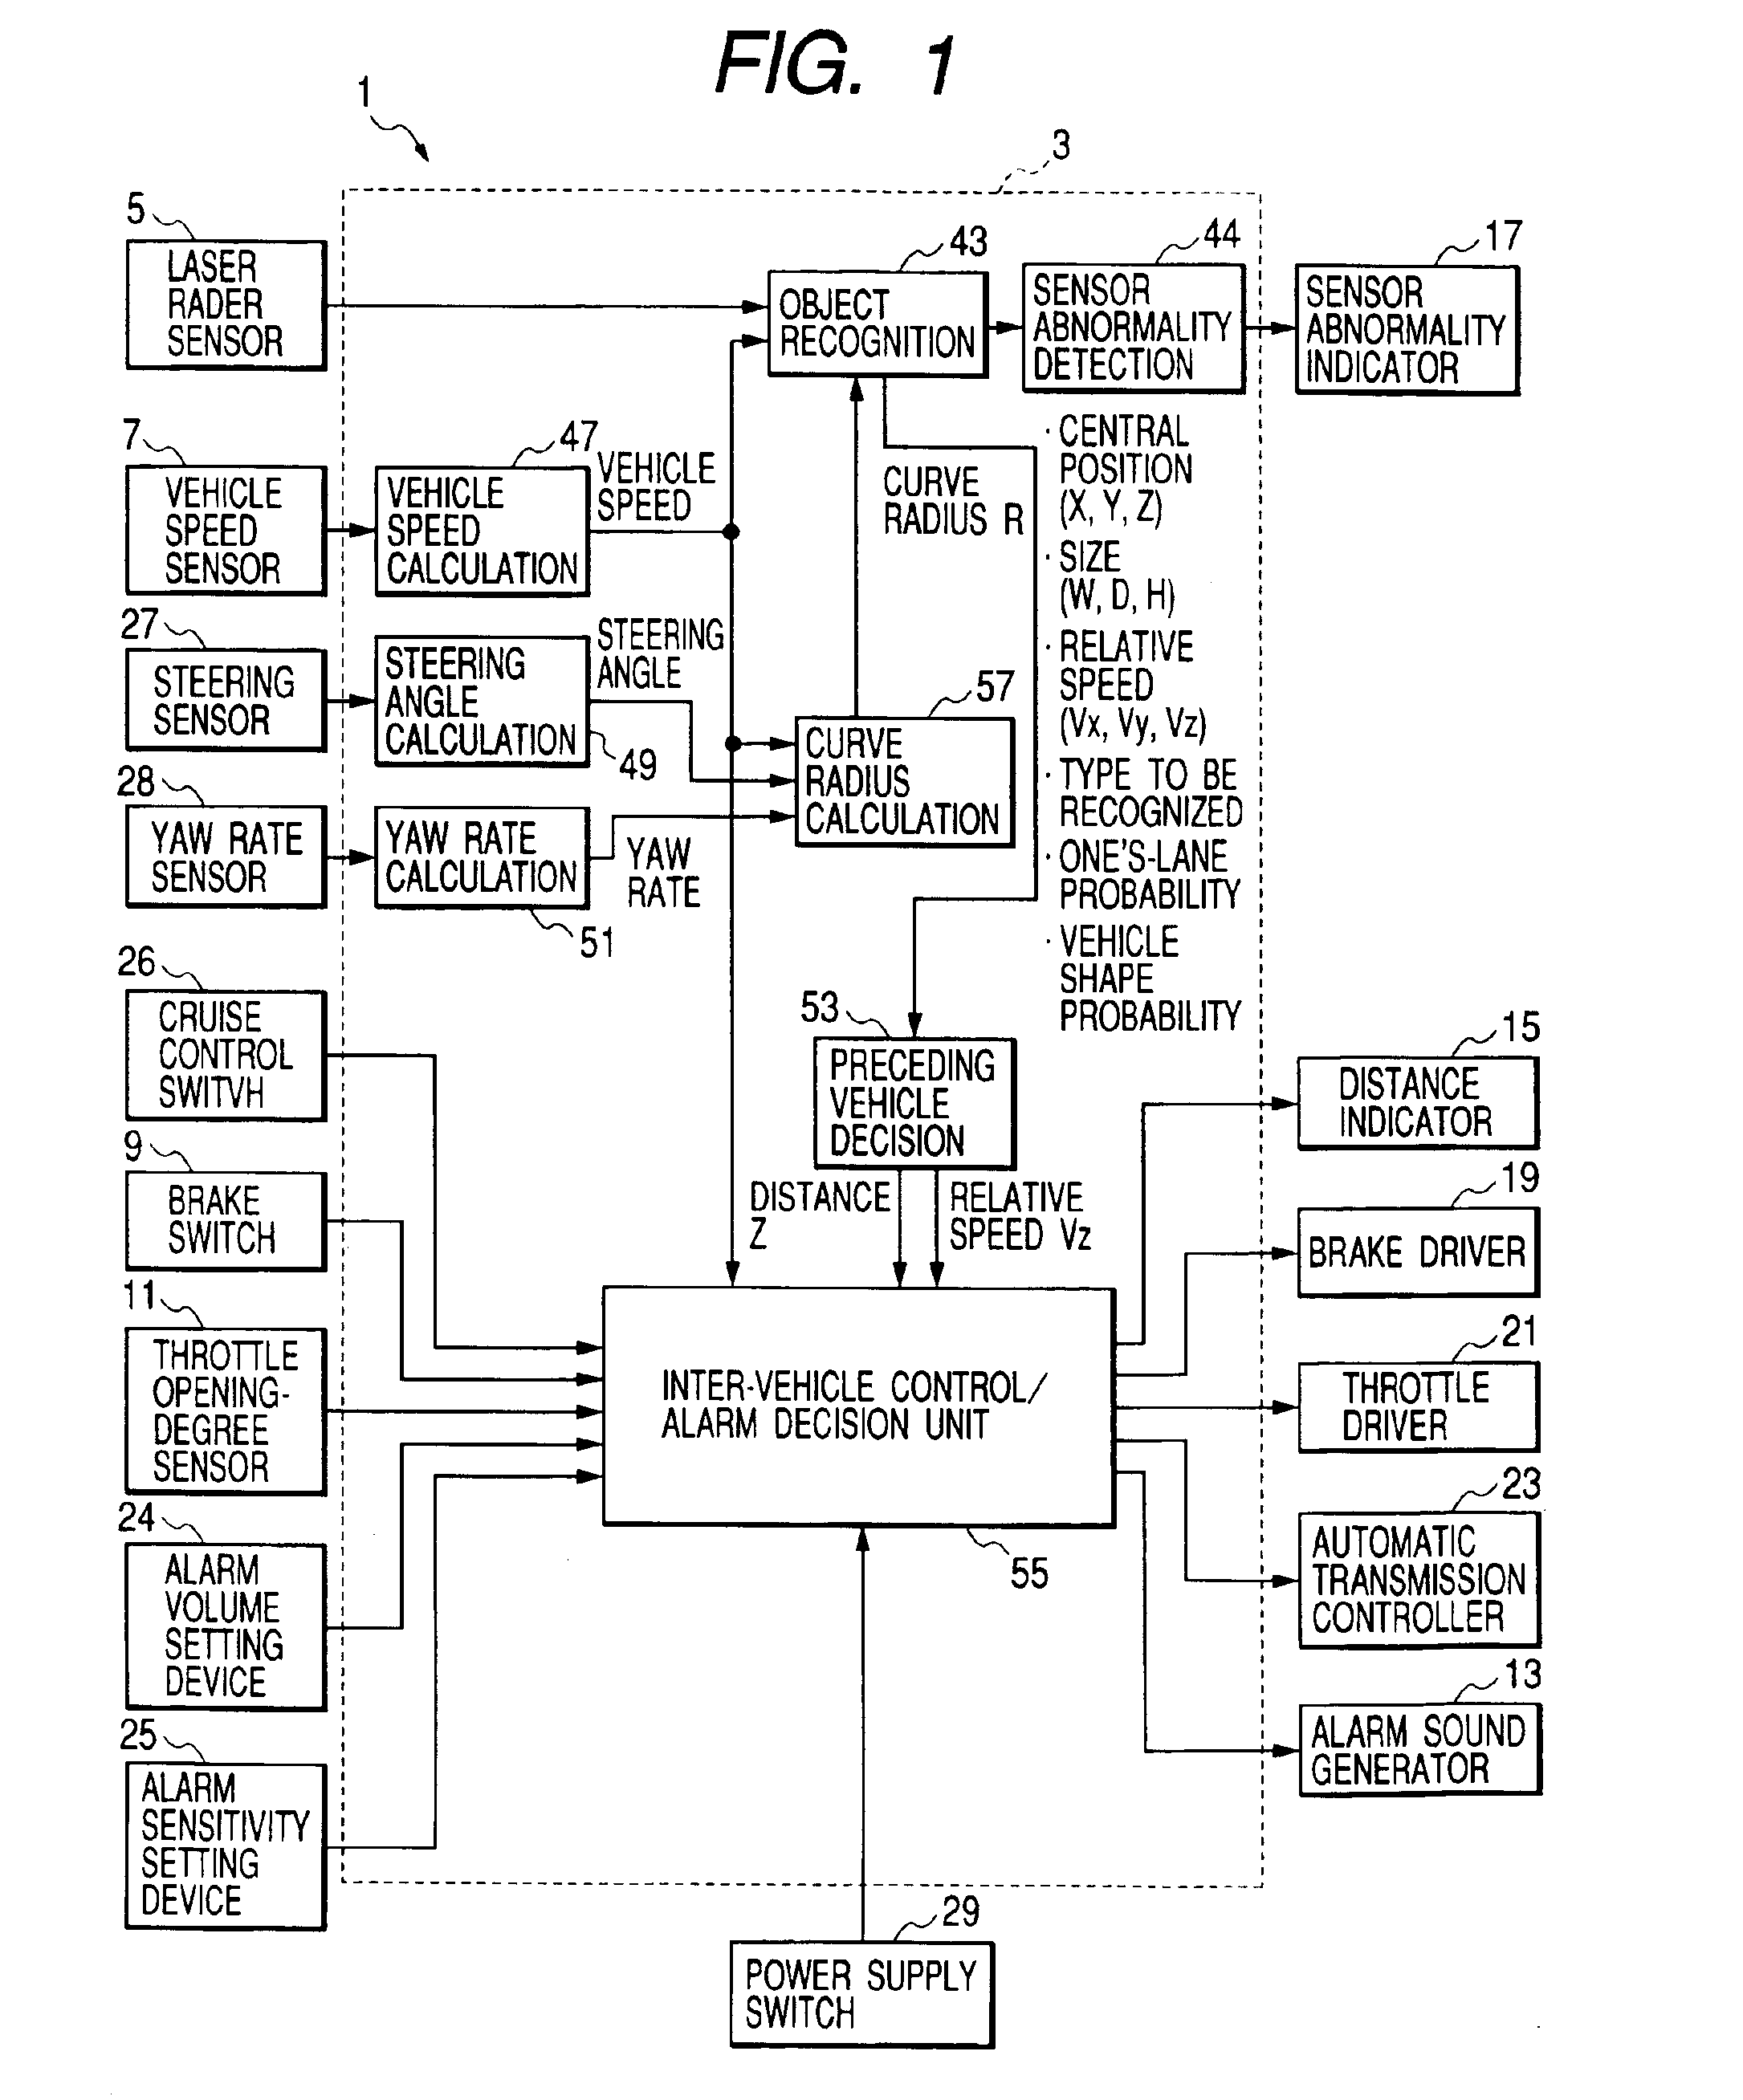 Object recognition apparatus for vehicle, and inter-vehicle distance control unit